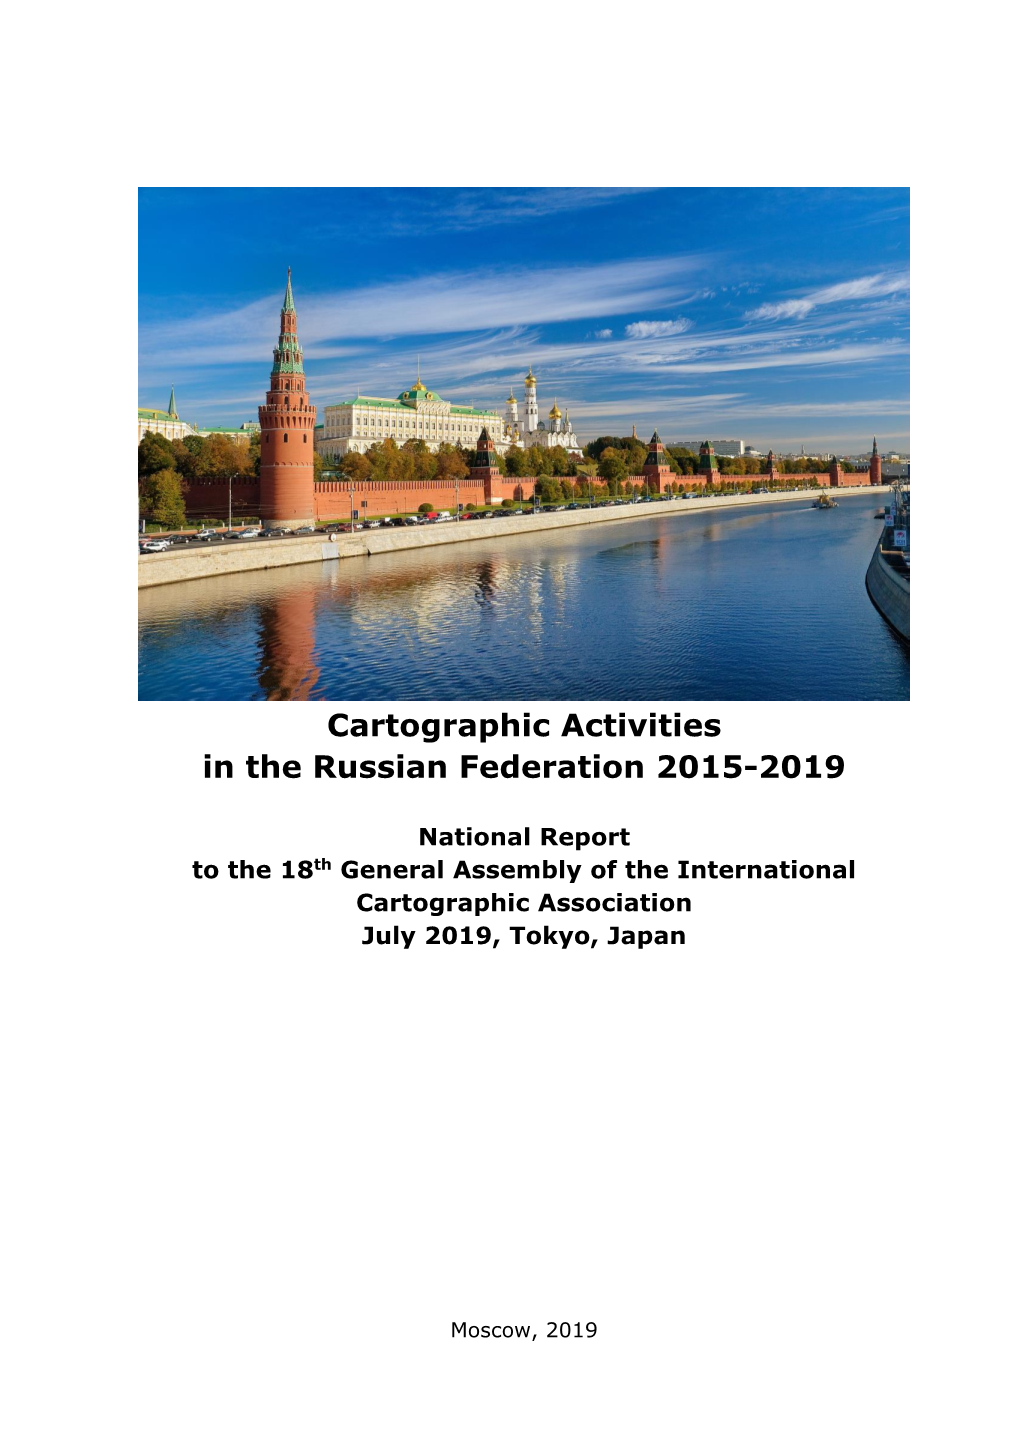 Cartographic Activities in the Russian Federation 2015-2019